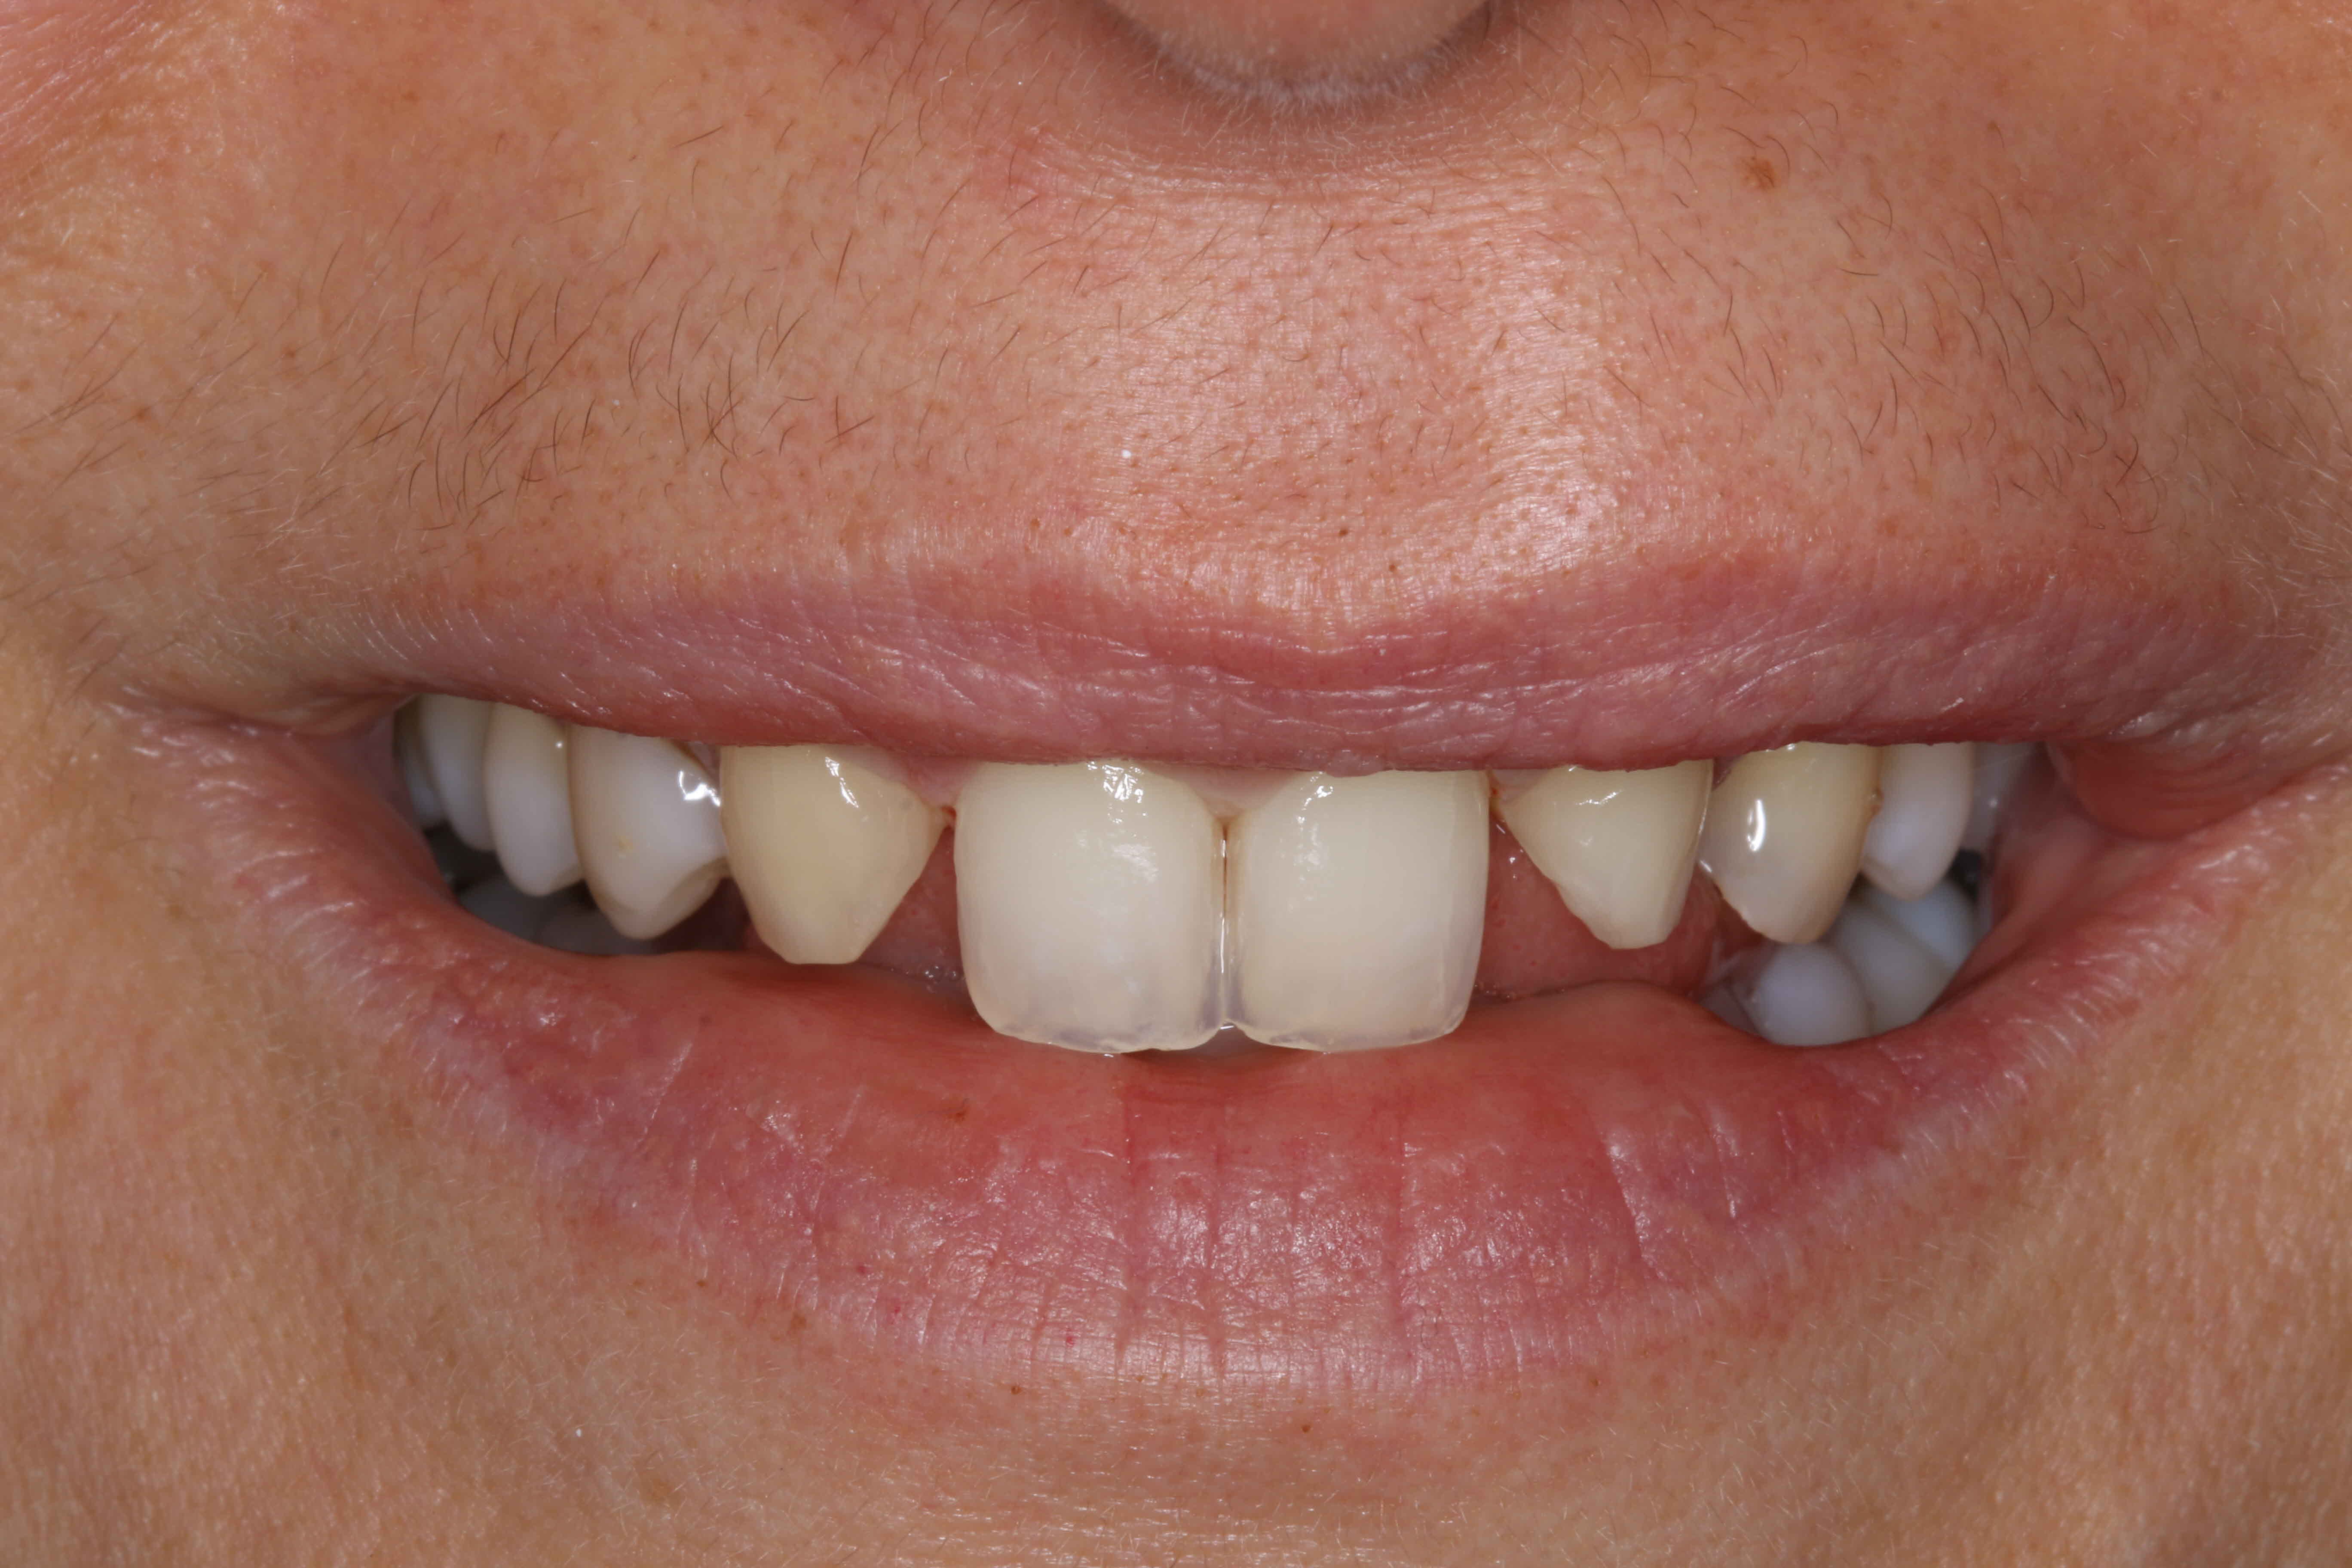 orthodontics or cosmetic dentistry